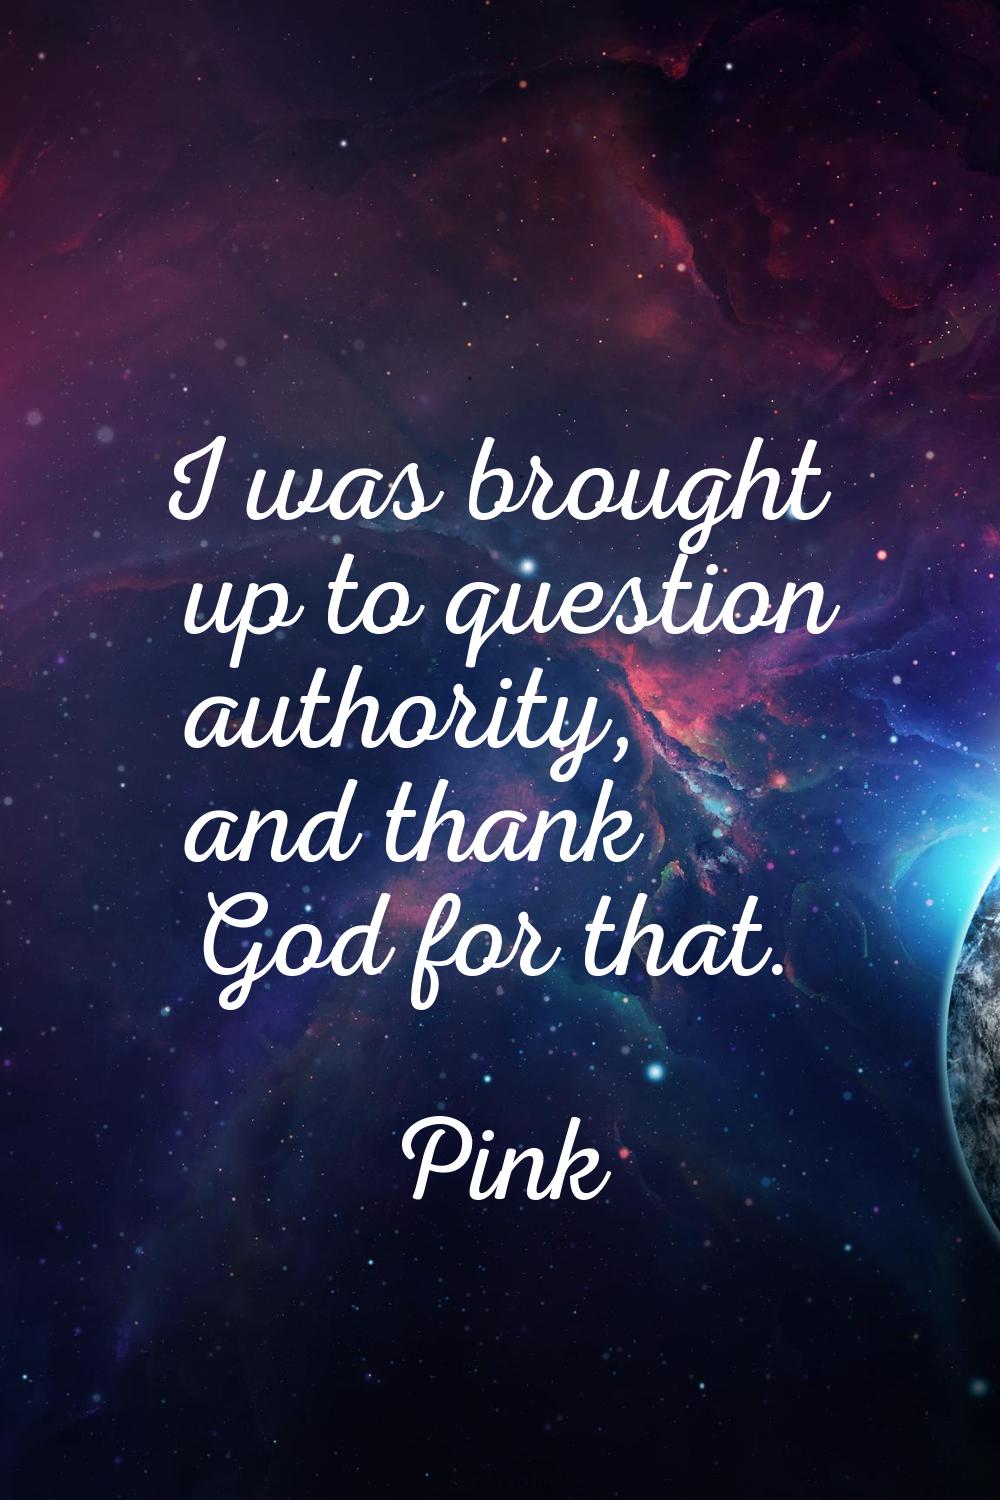 I was brought up to question authority, and thank God for that.